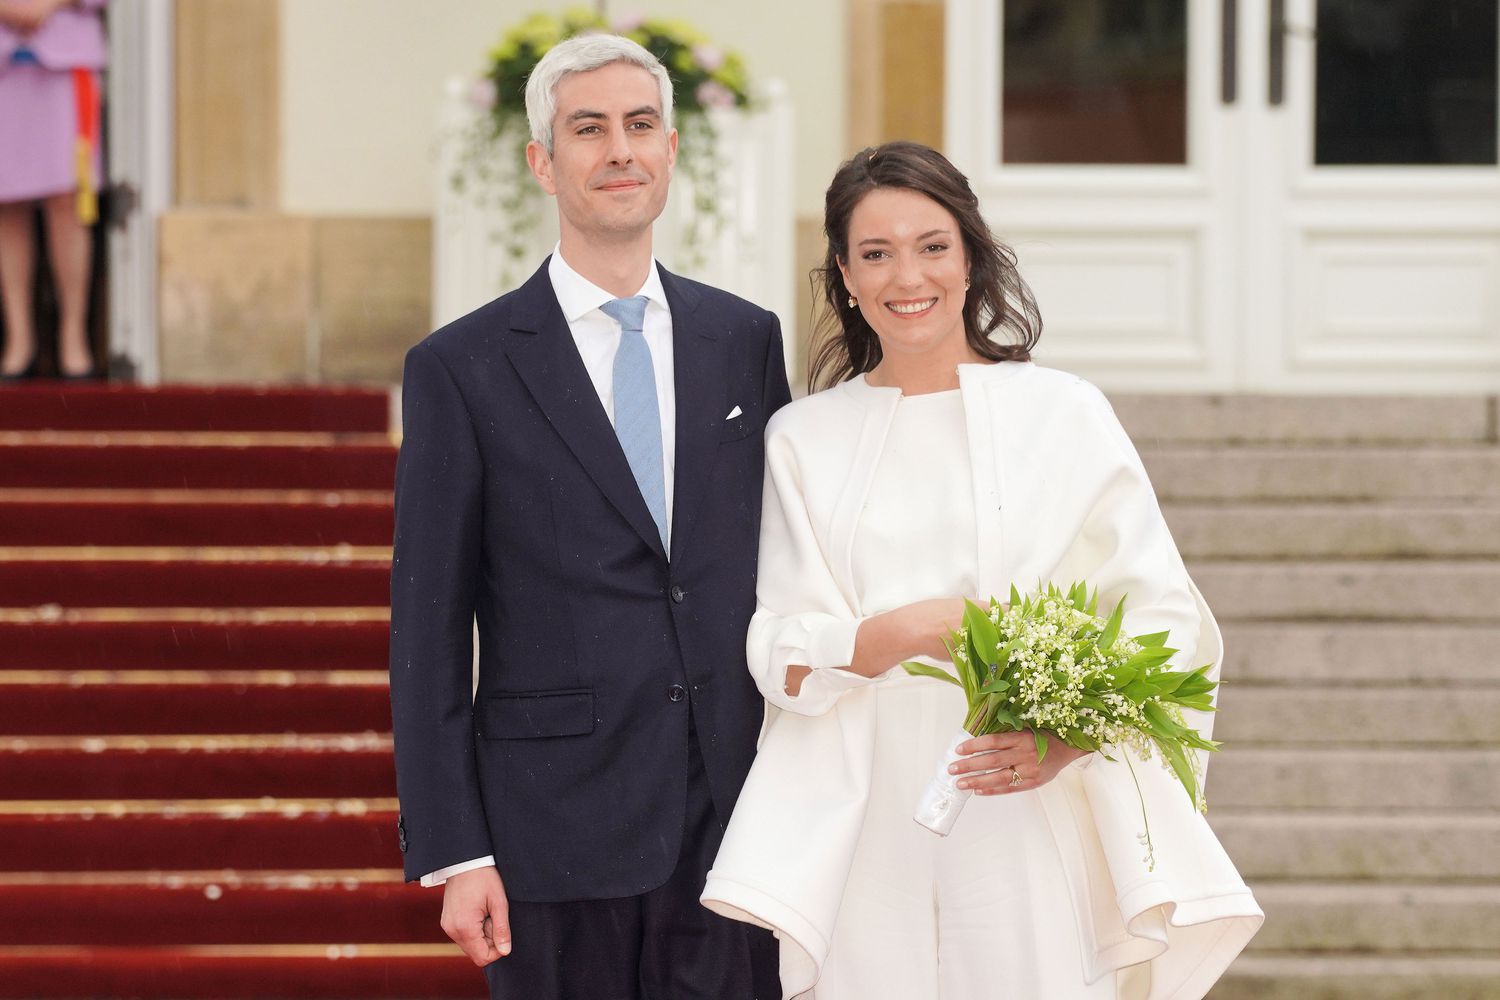 LUXEMBOURG, LUXEMBOURG - APRIL 22: Her Royal Highness Alexandra of Luxembourg & Nicolas Bagory pose as they leave after their Civil Wedding at Luxembourg City Hall on April 22, 2023 in Luxembourg, Luxembourg. (Photo by Sylvain Lefevre/Getty Images)